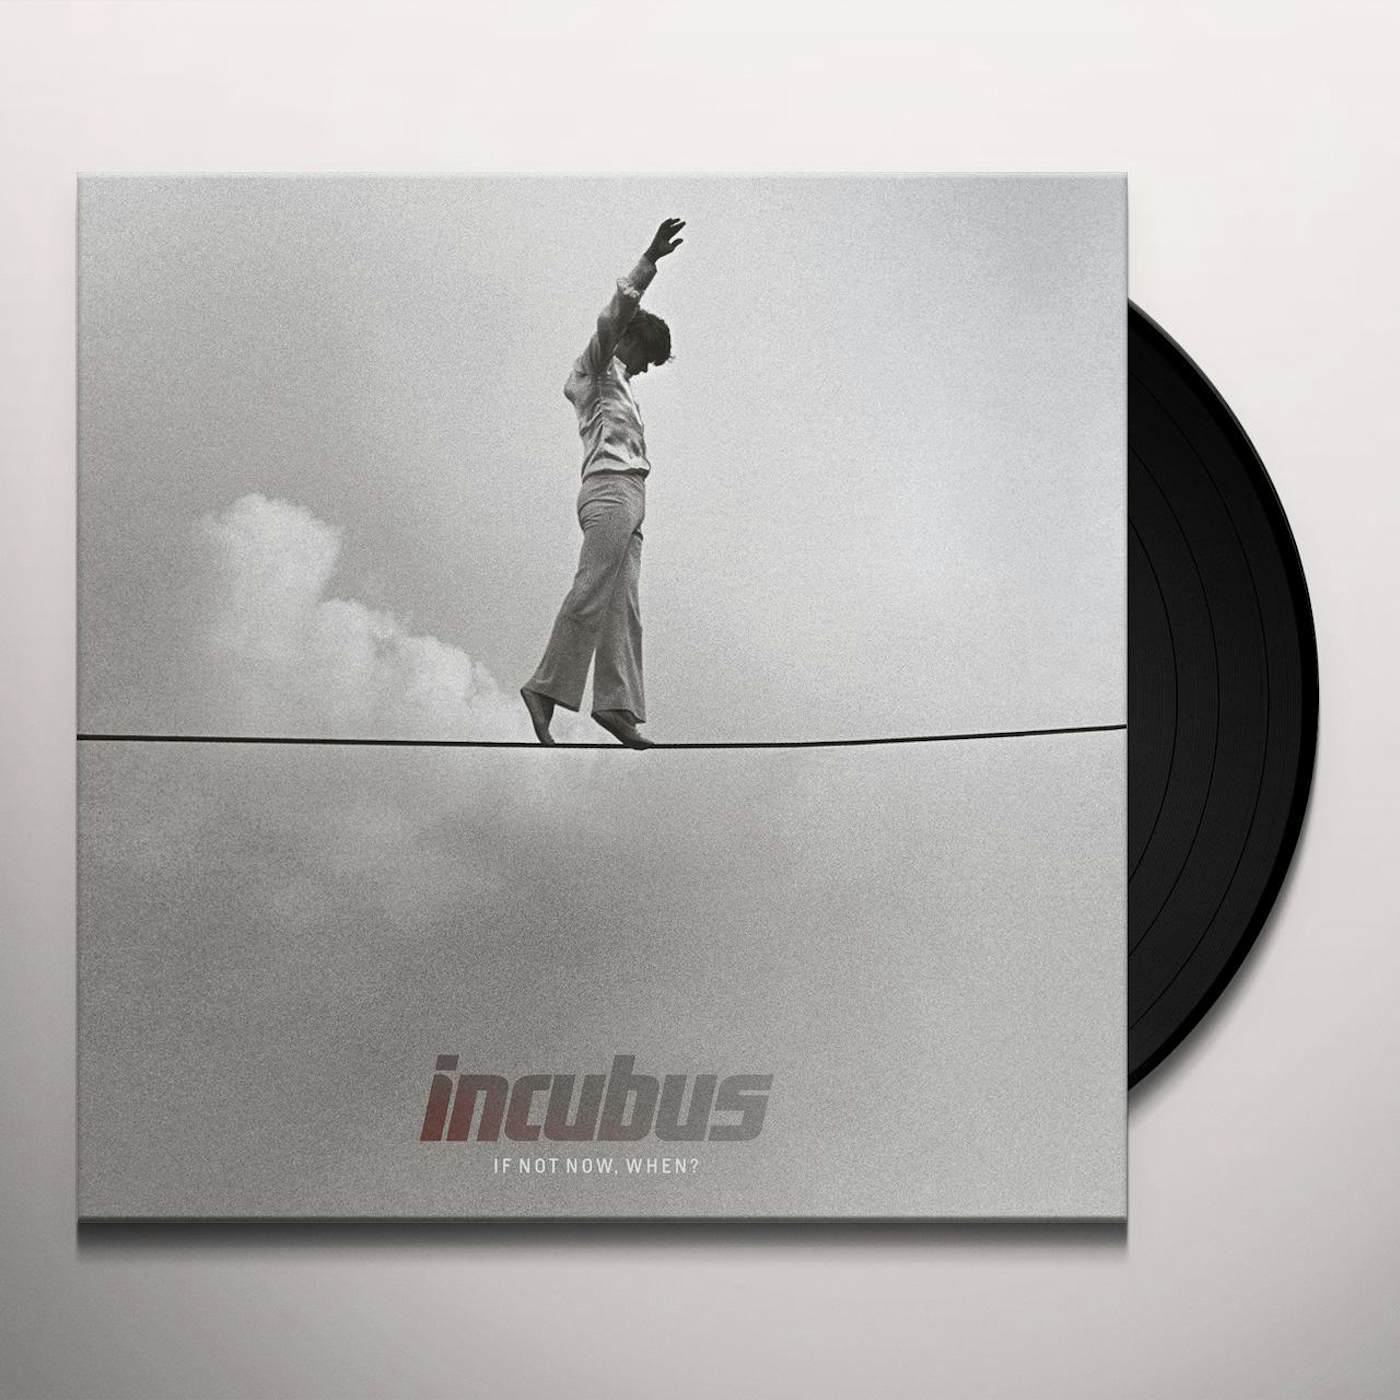 Incubus If Not Now When Vinyl Record